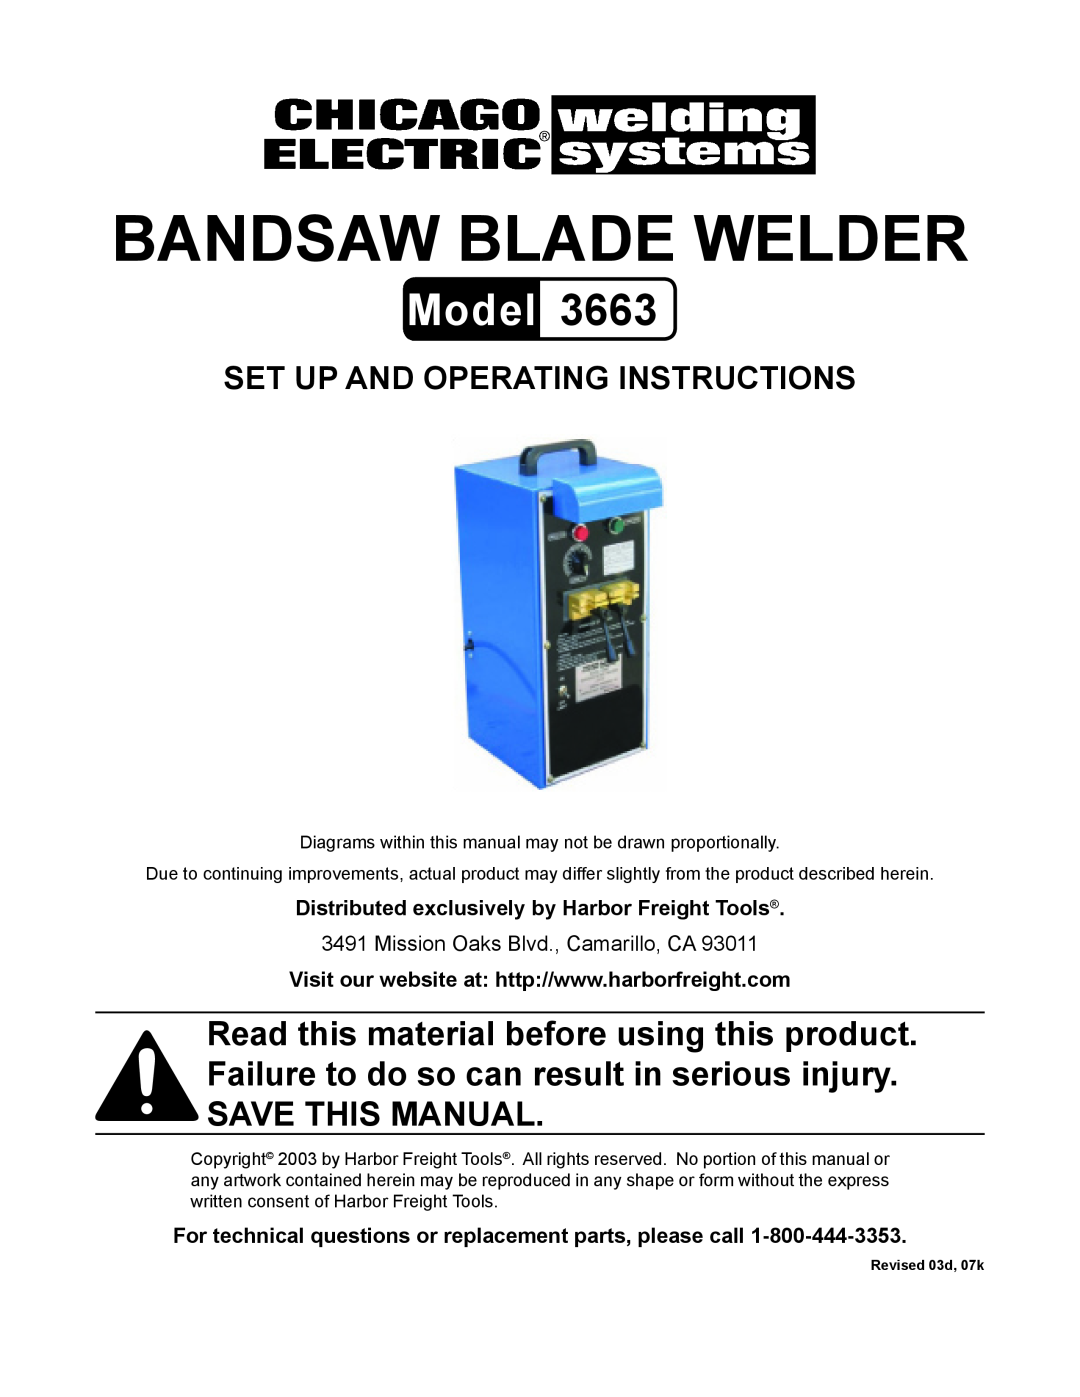 Chicago Electric 3663 operating instructions Distributed exclusively by Harbor Freight Tools, Bandsaw Blade Welder, Model 